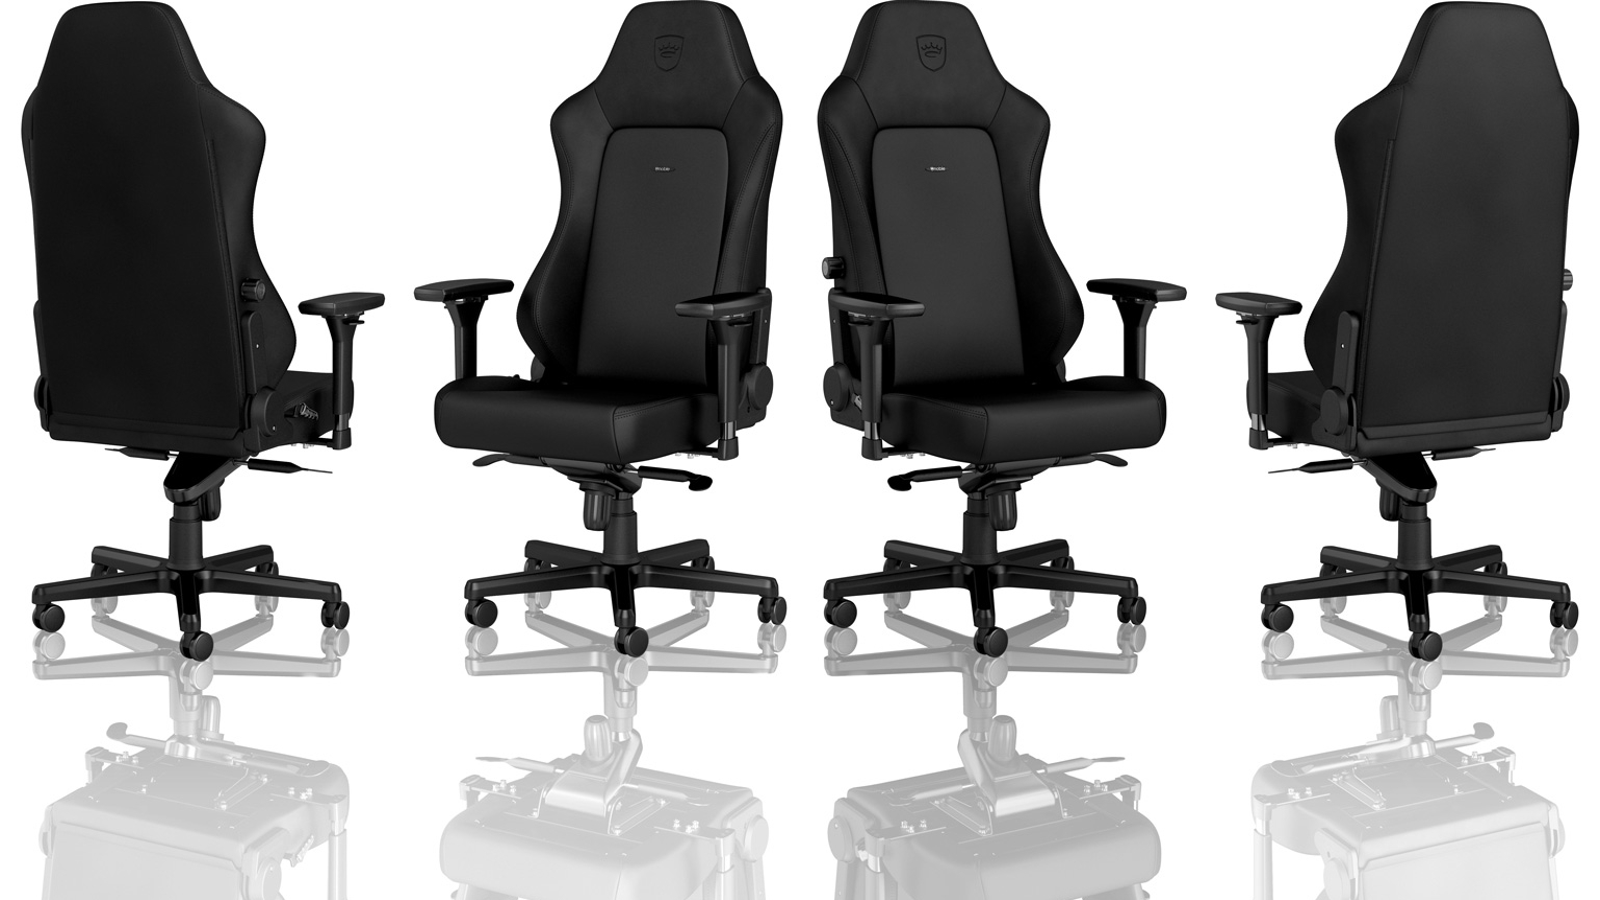  noblechairs Memory Foam Lumbar-Support Pillow, Office and  Gaming-Chair Cushion Set - Black : Office Products